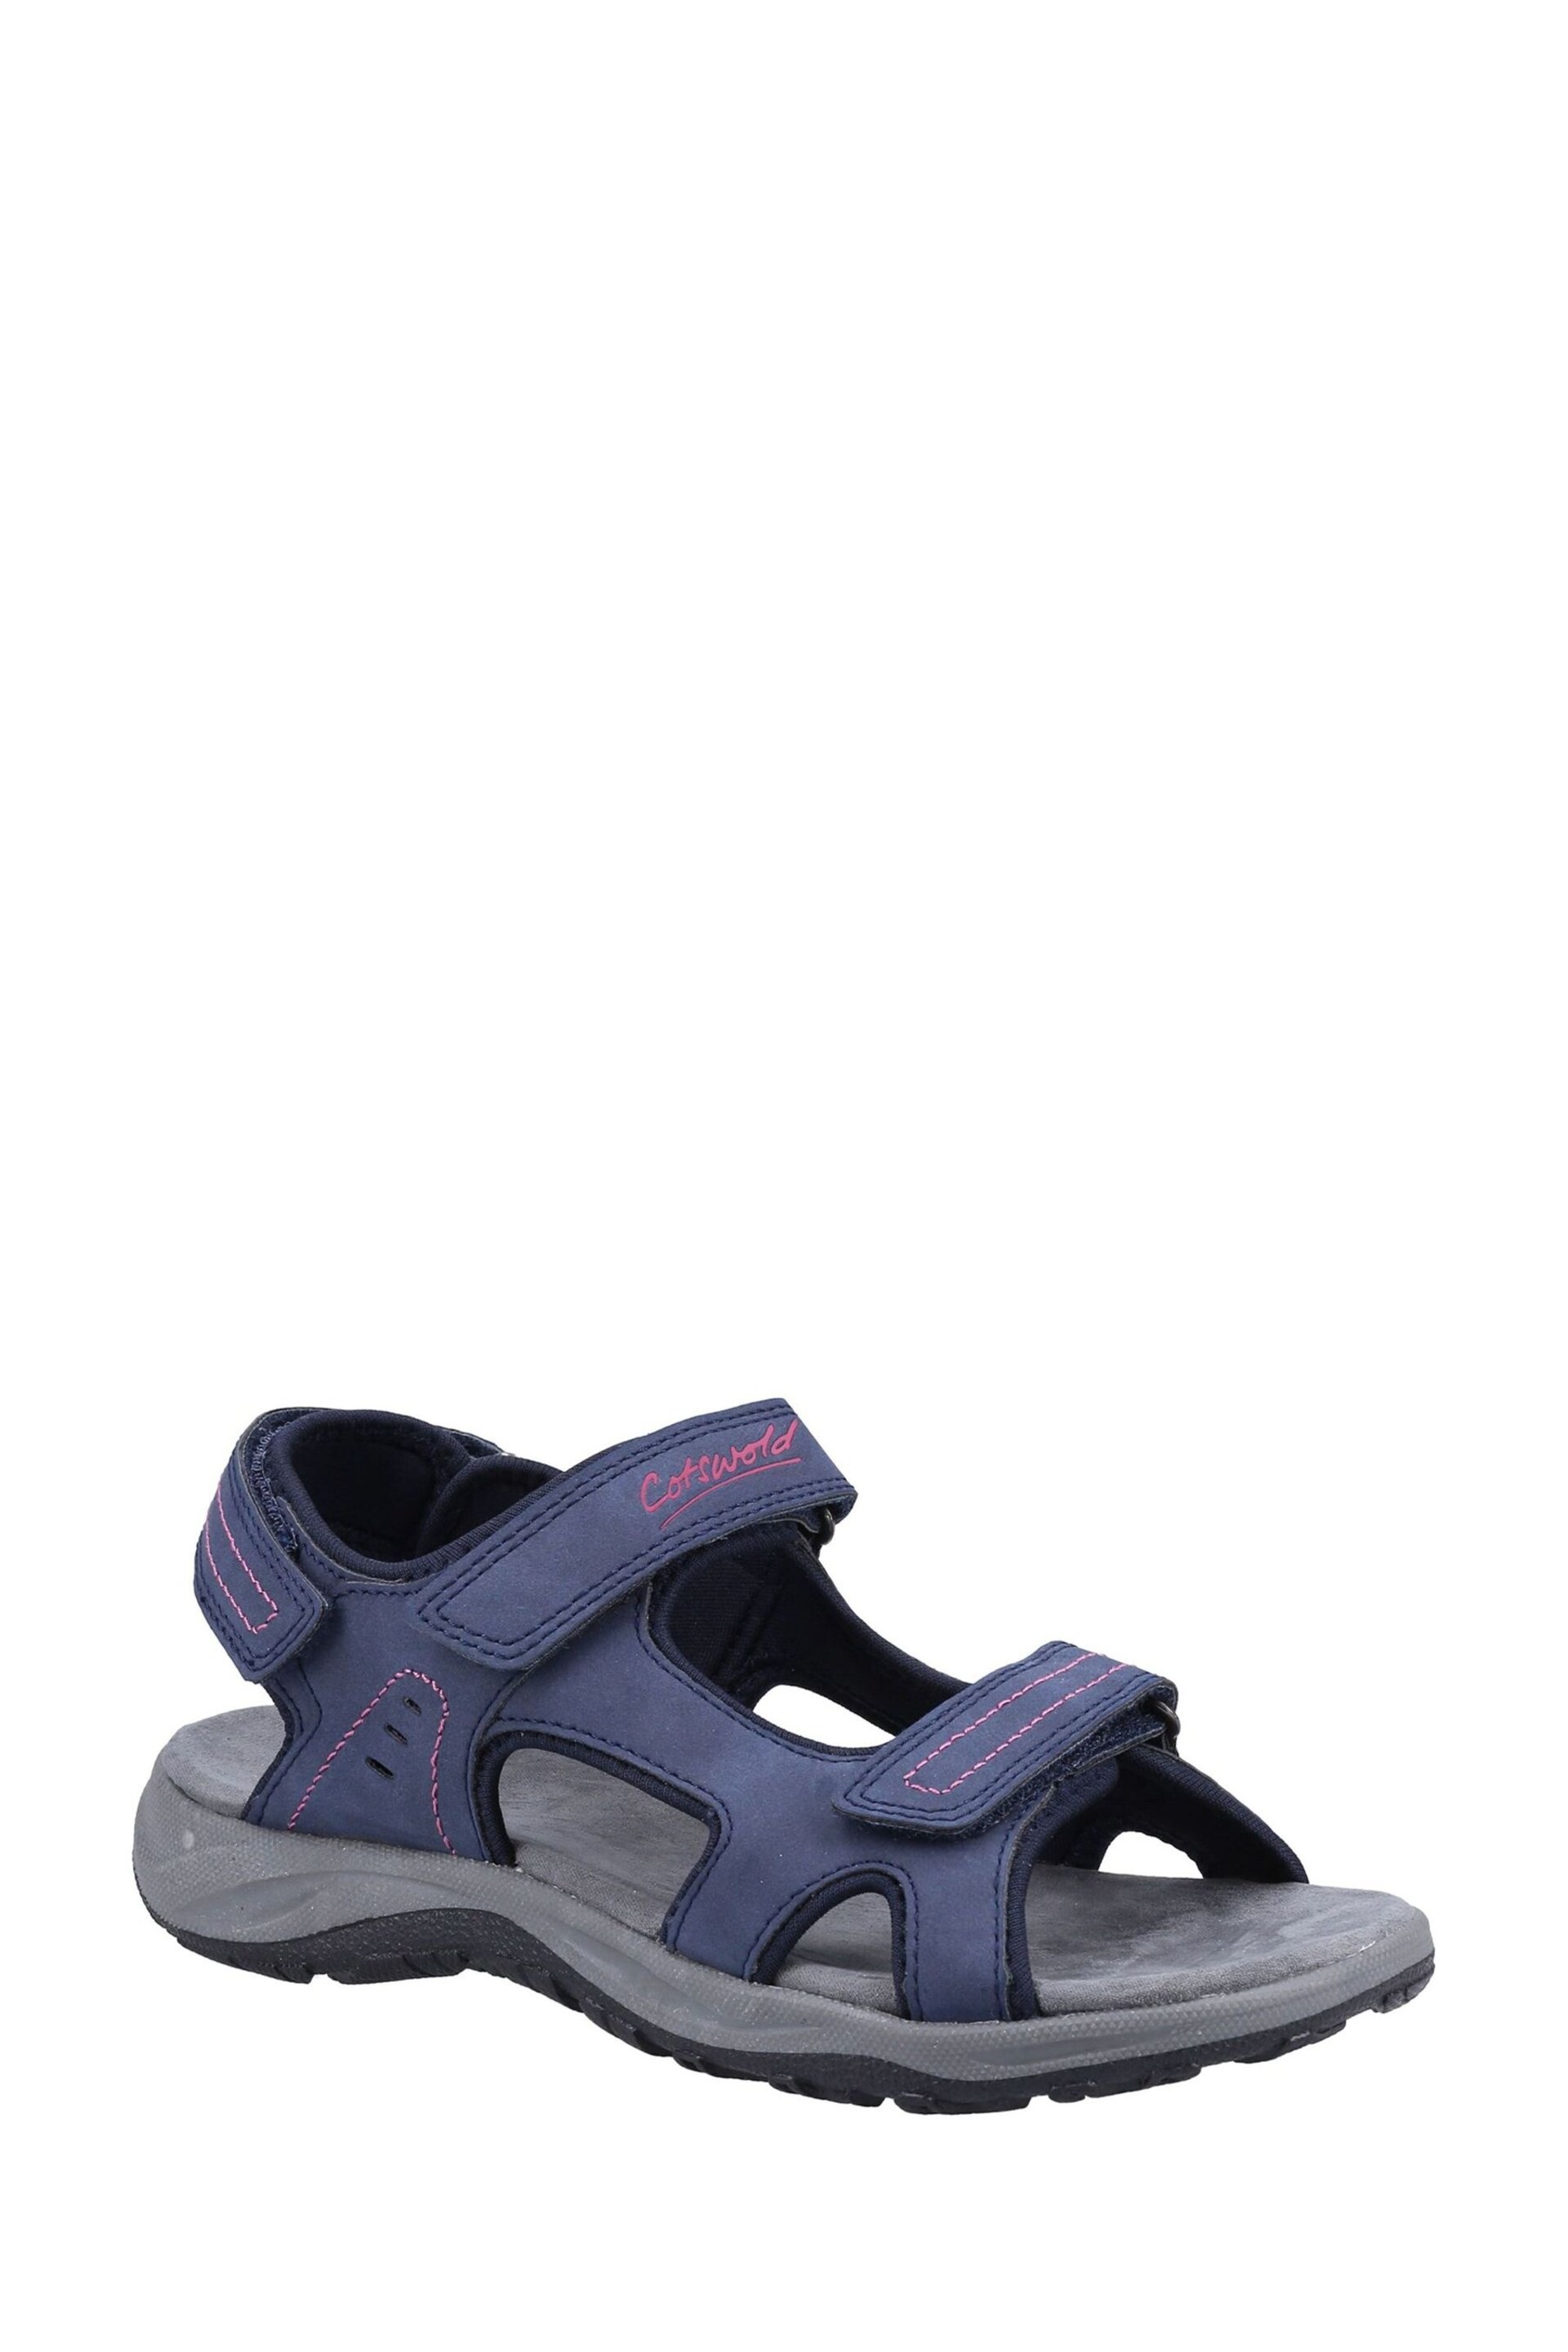 Cotswold Blue Freshford Touch Fastening Sandals - Image 2 of 4